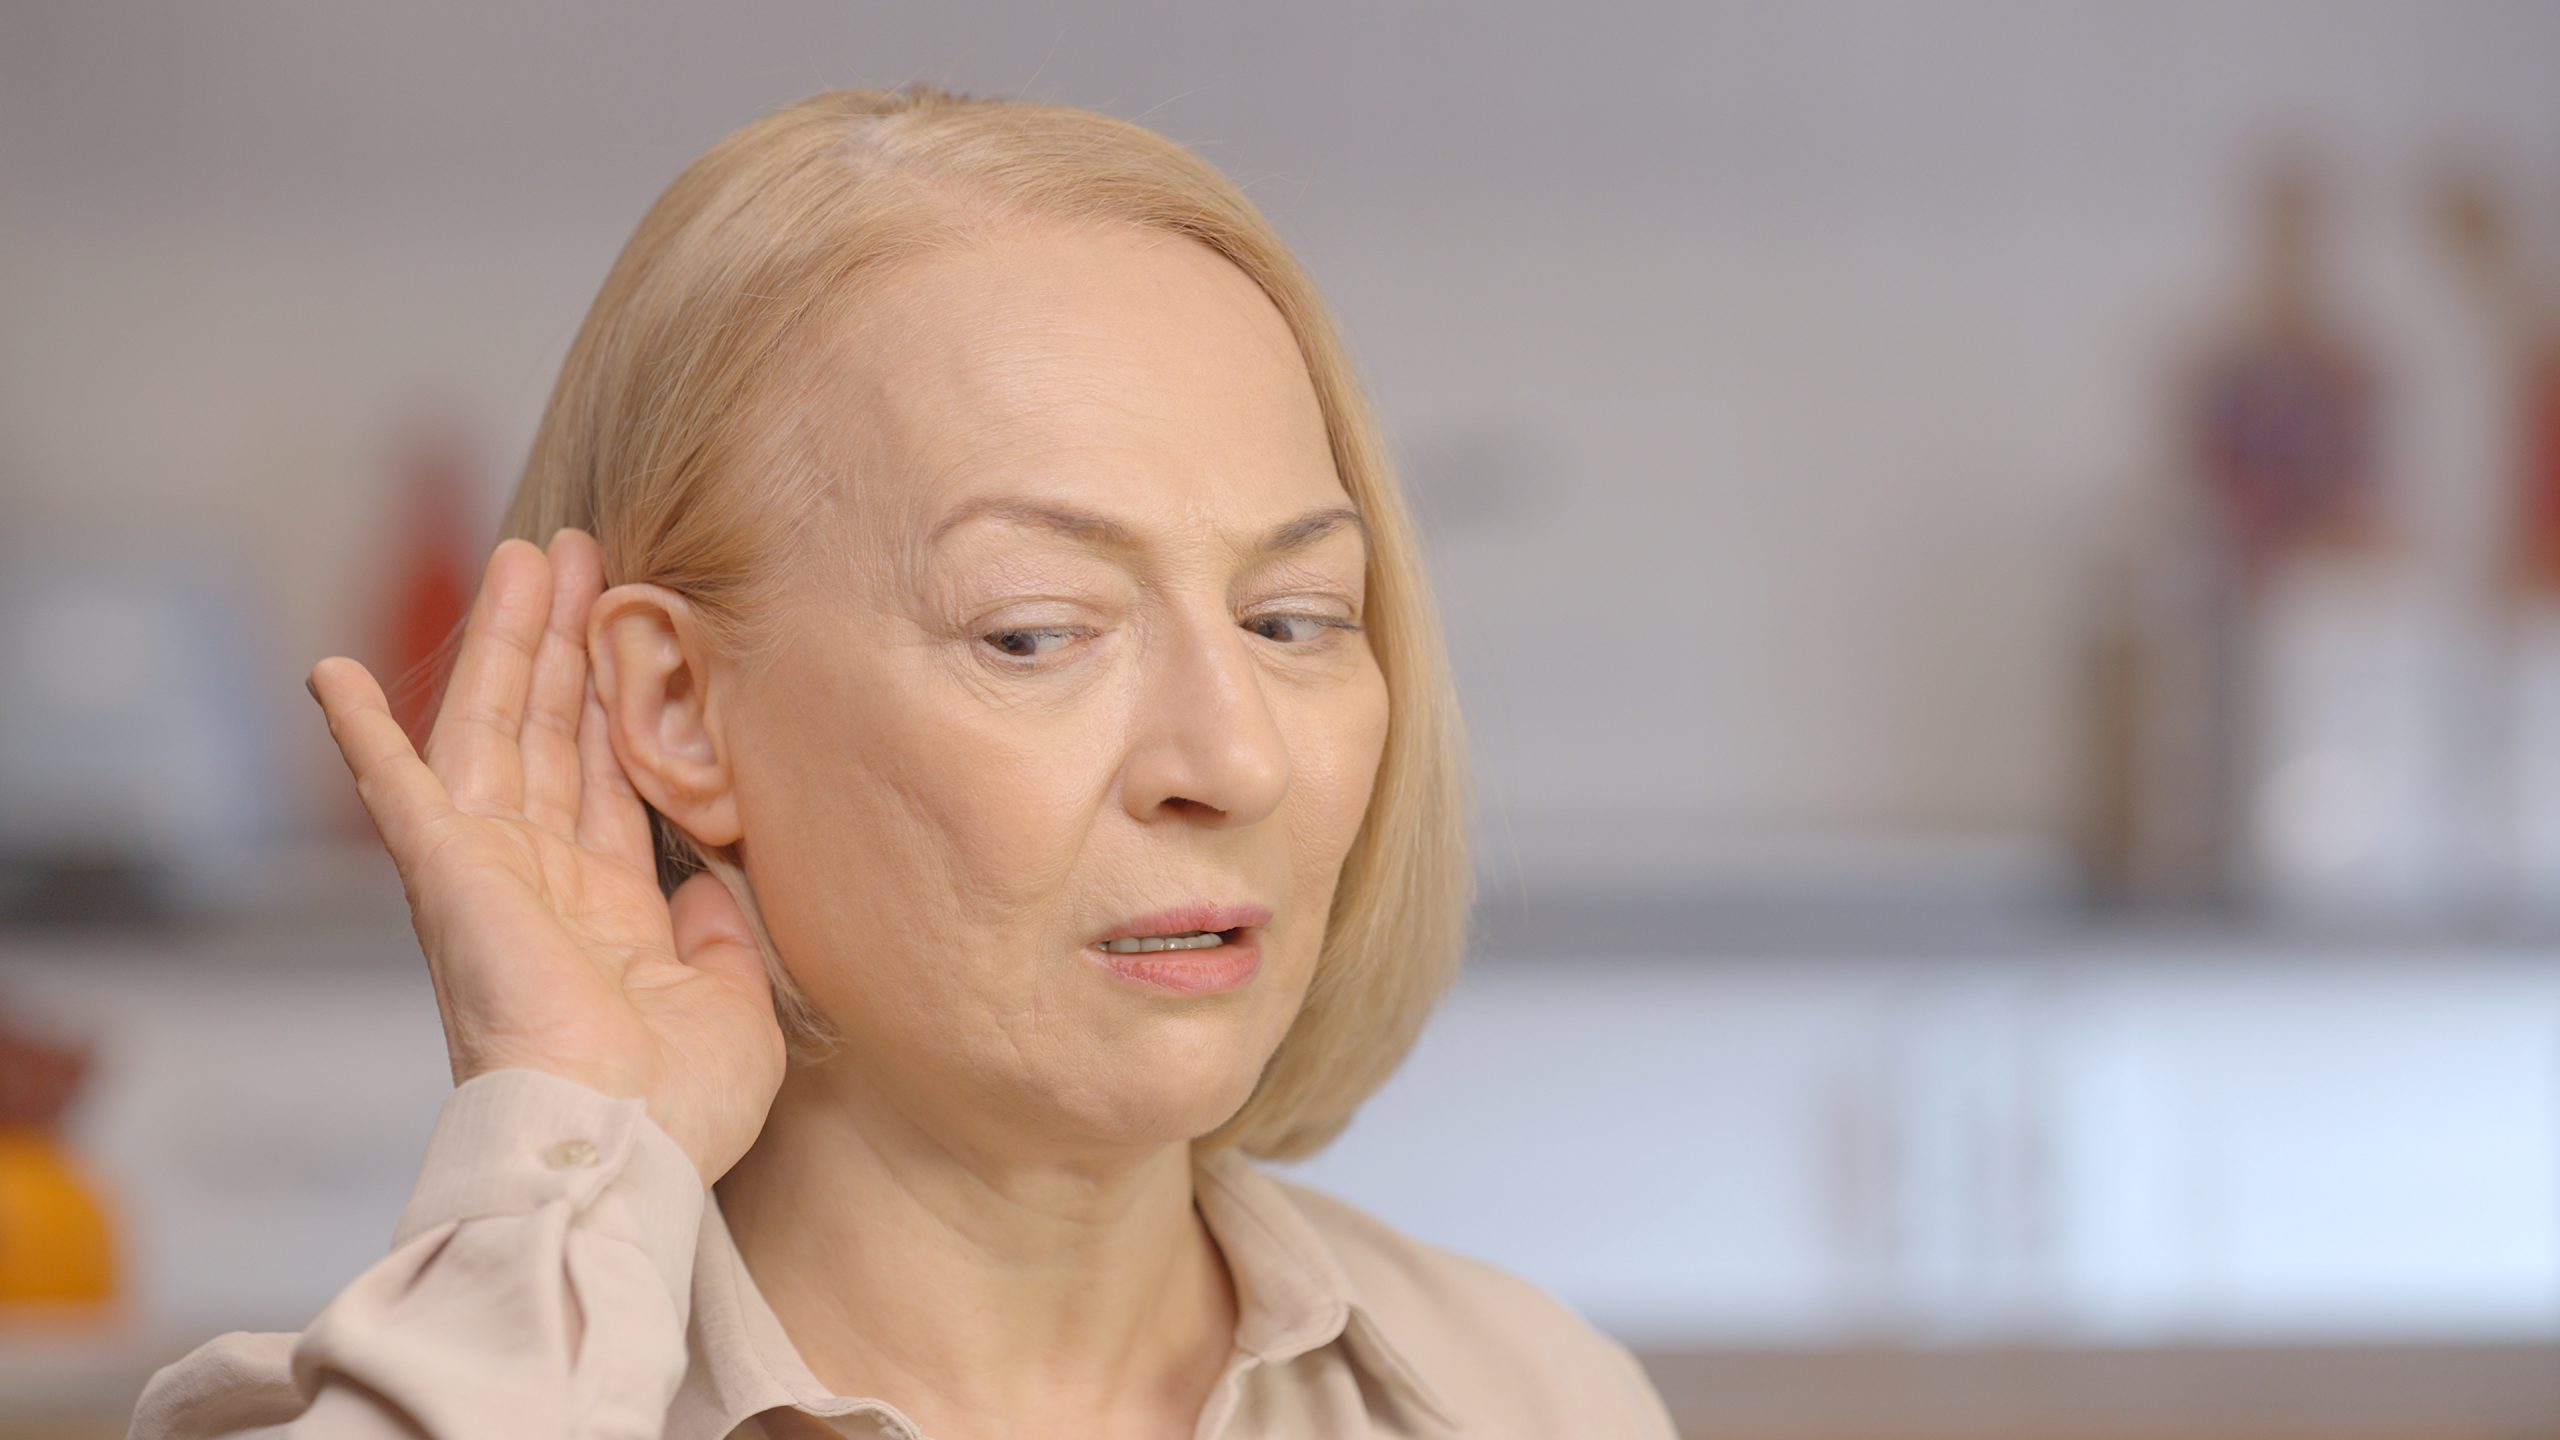 How to manage hearing loss due to aging